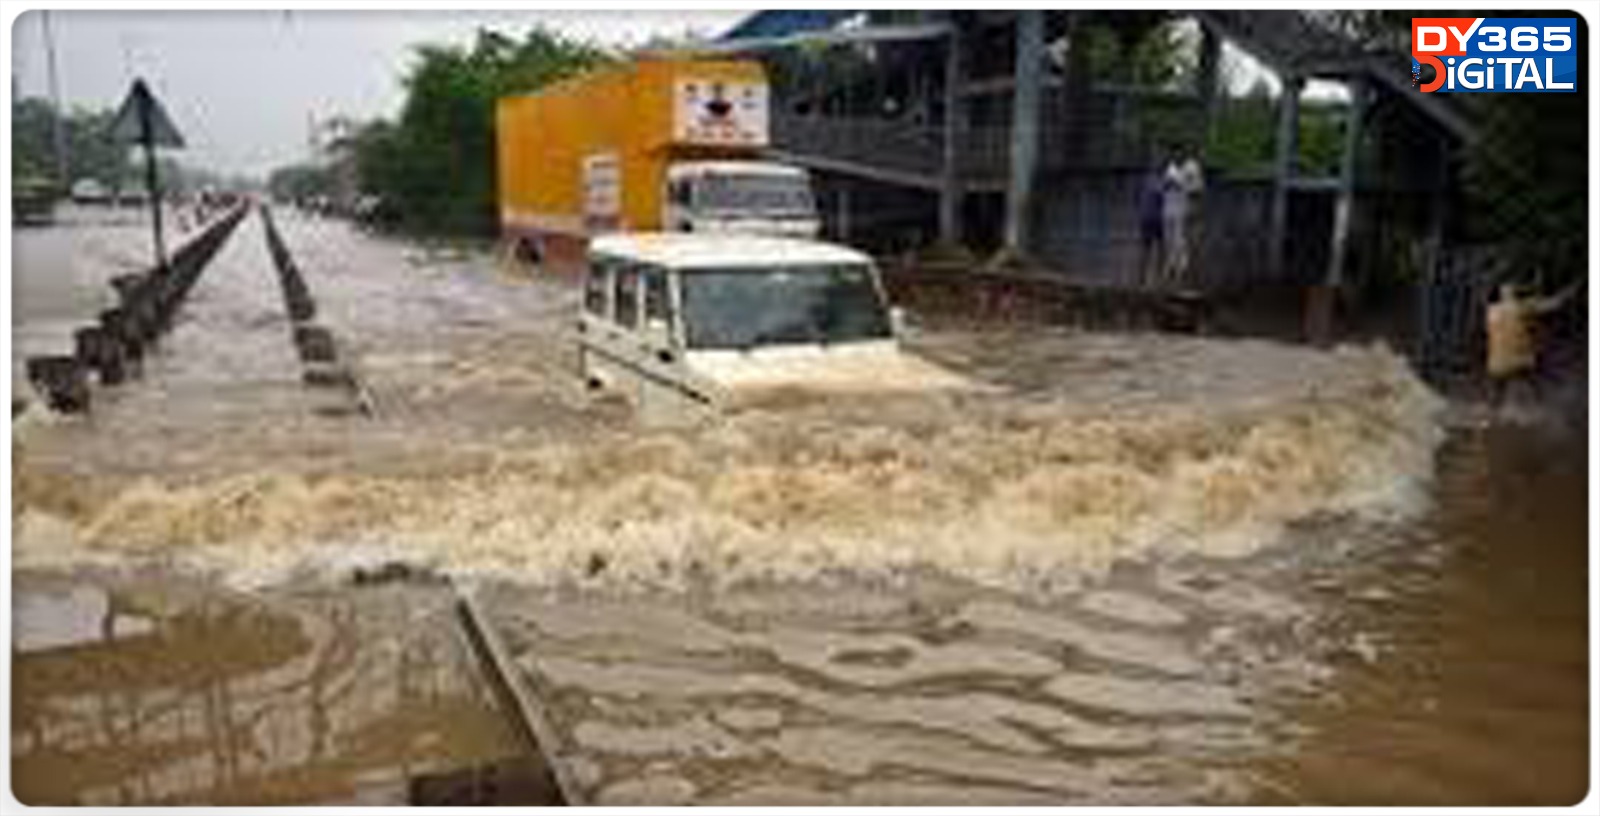 pune-is-grappling-with-severe-flooding-as-heavy-rain-continues-to-lash-the-city